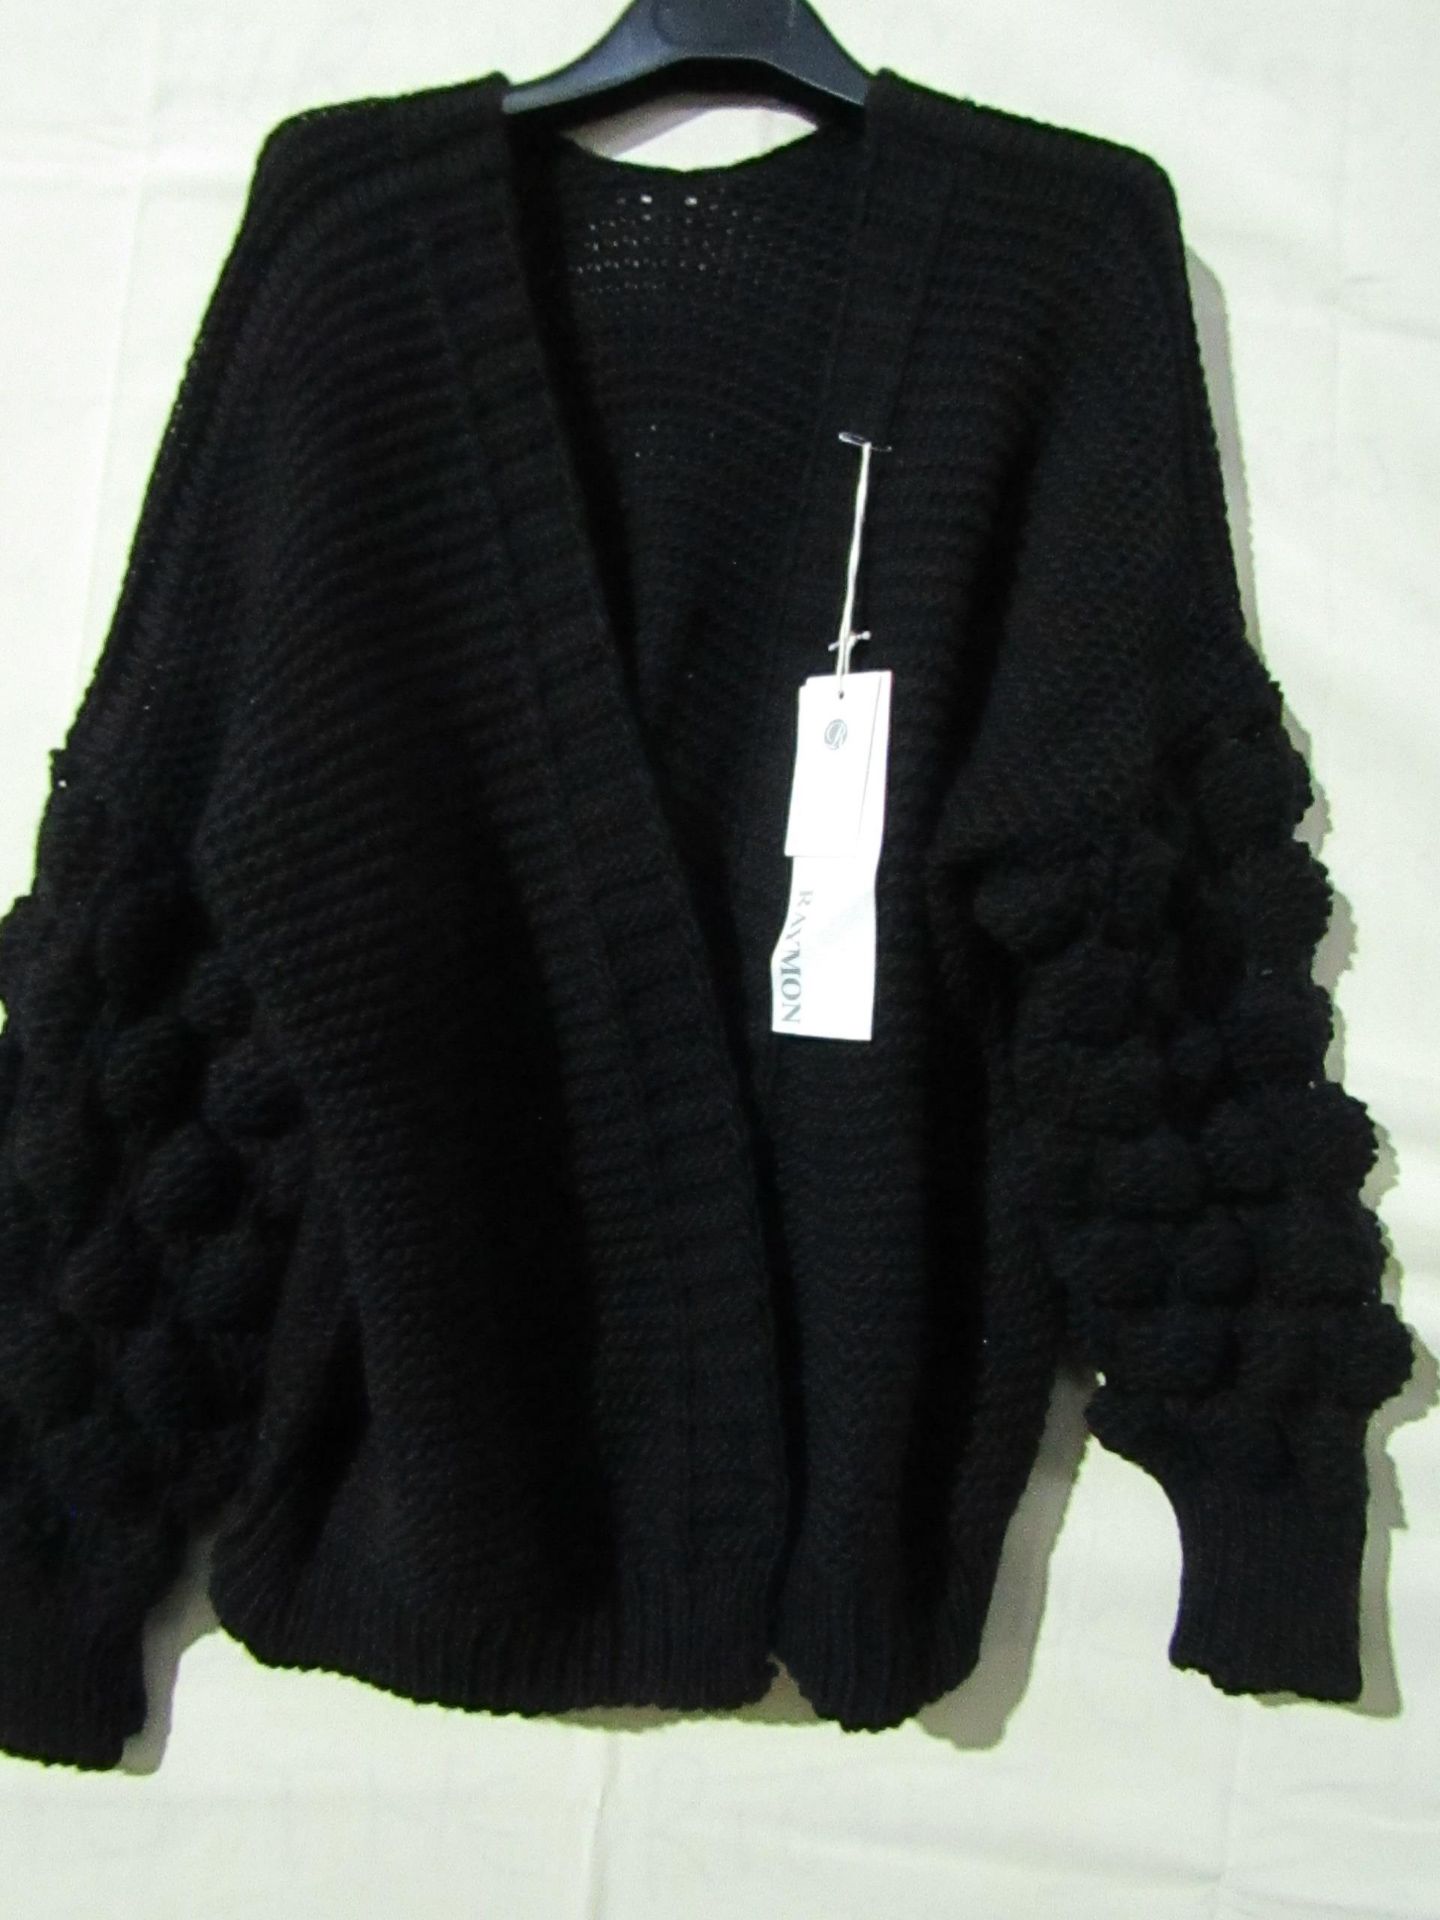 Raymon Open Fronted Cardigan Black Size Approx S-M New & Packaged